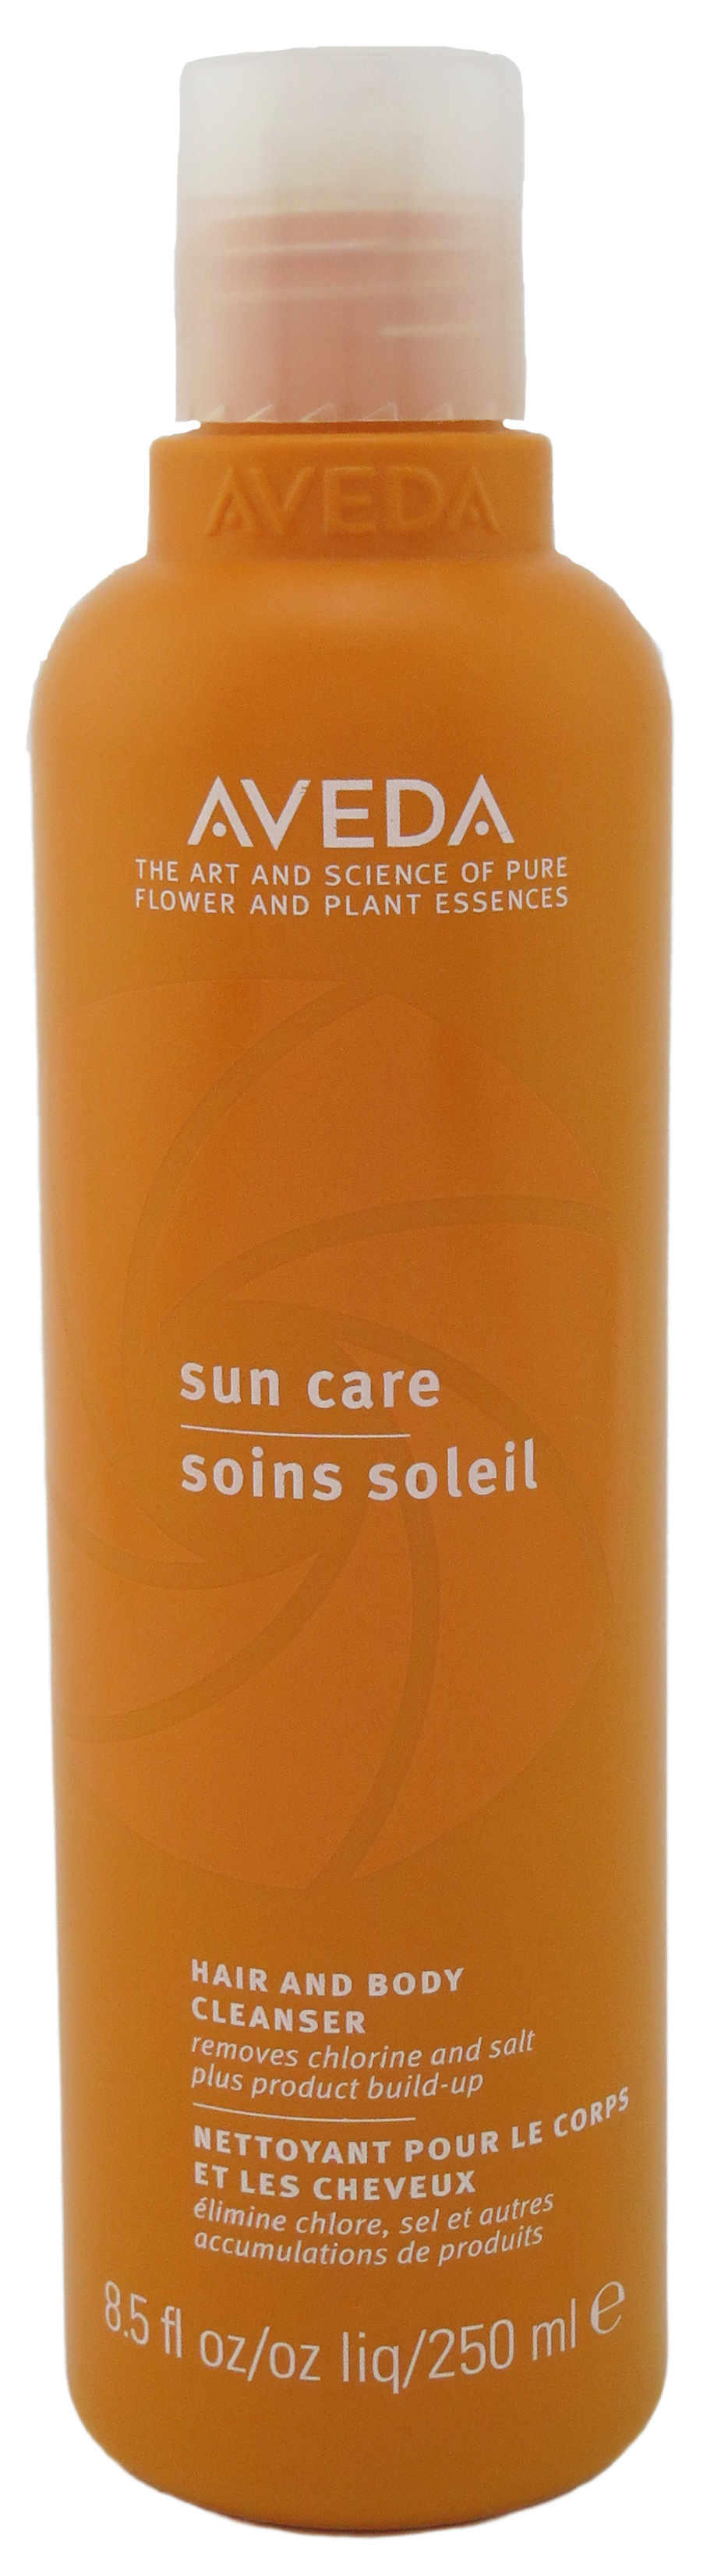 Aveda Sun care Protective Hair and body cleanser  8.5 Fl oz